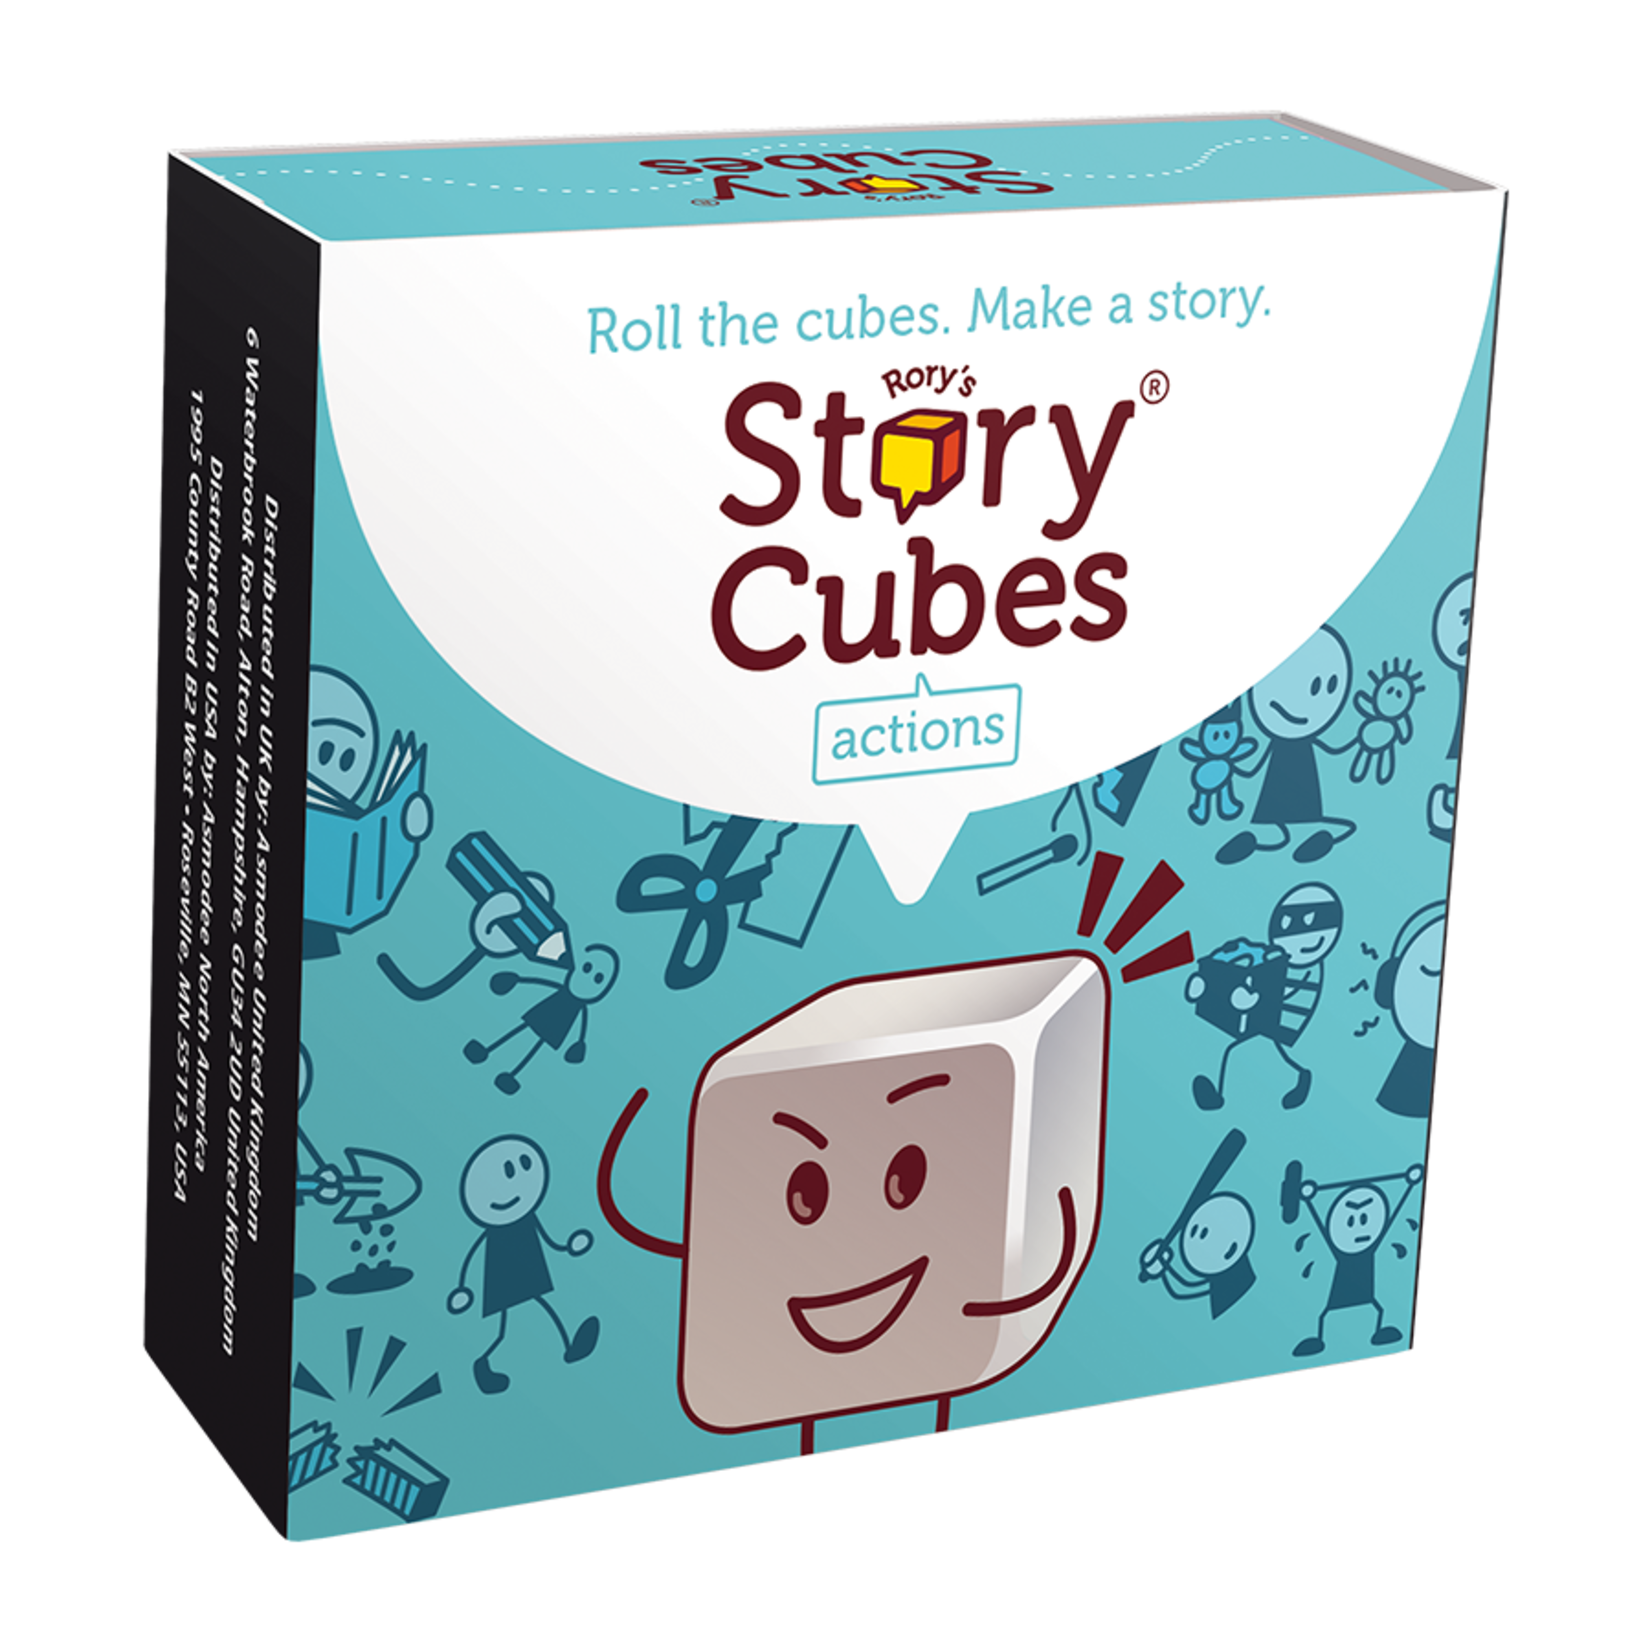 Zygomatic Rory's Story Cubes Actions